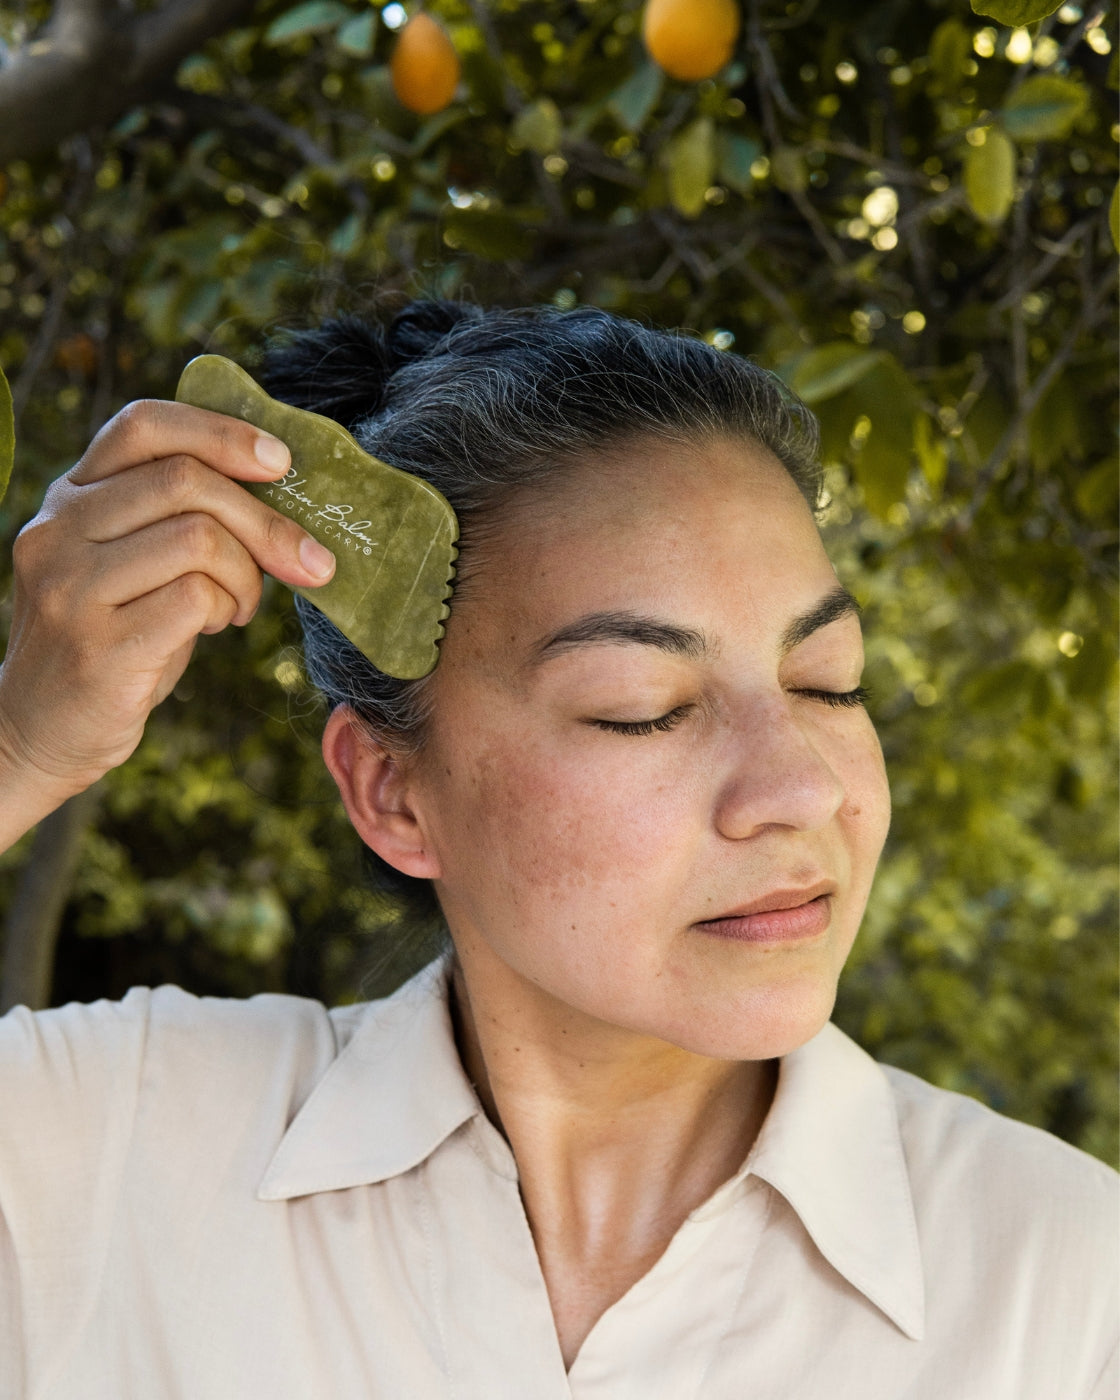 A woman uses the Jade Facial Stone on her face.